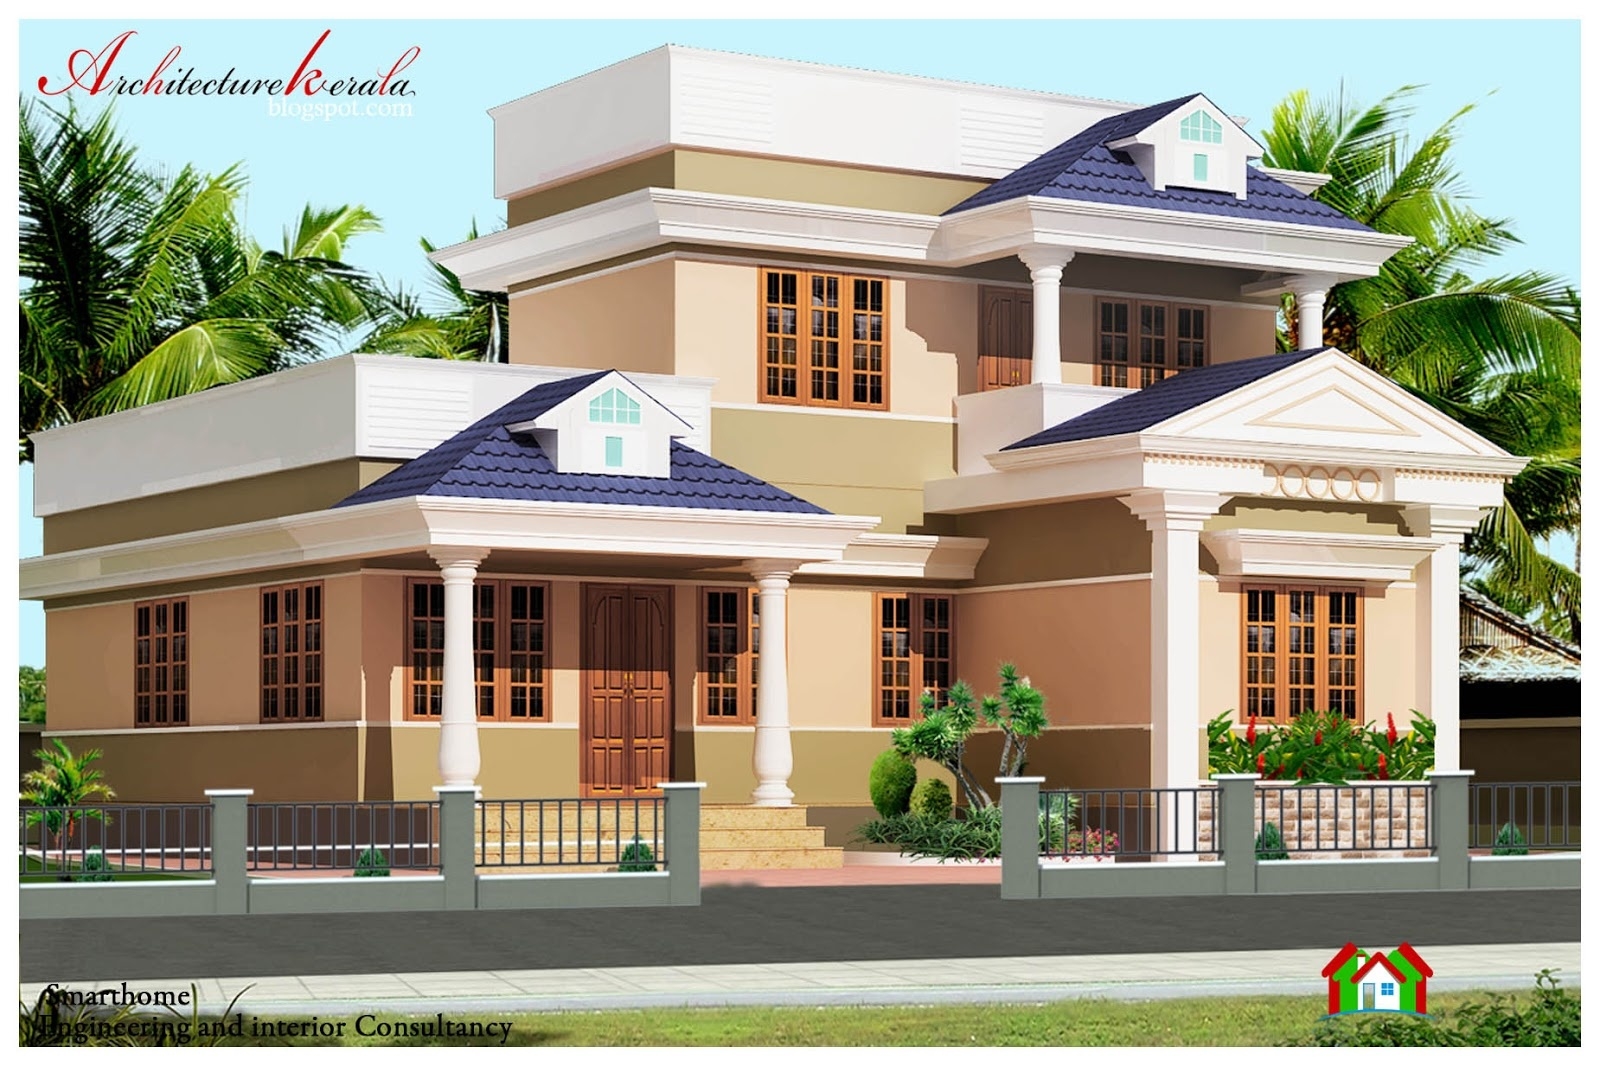 Popular architecture kerala: 1000 sq ft kerala style house plan inside most inspiring kerala house design with floor plans